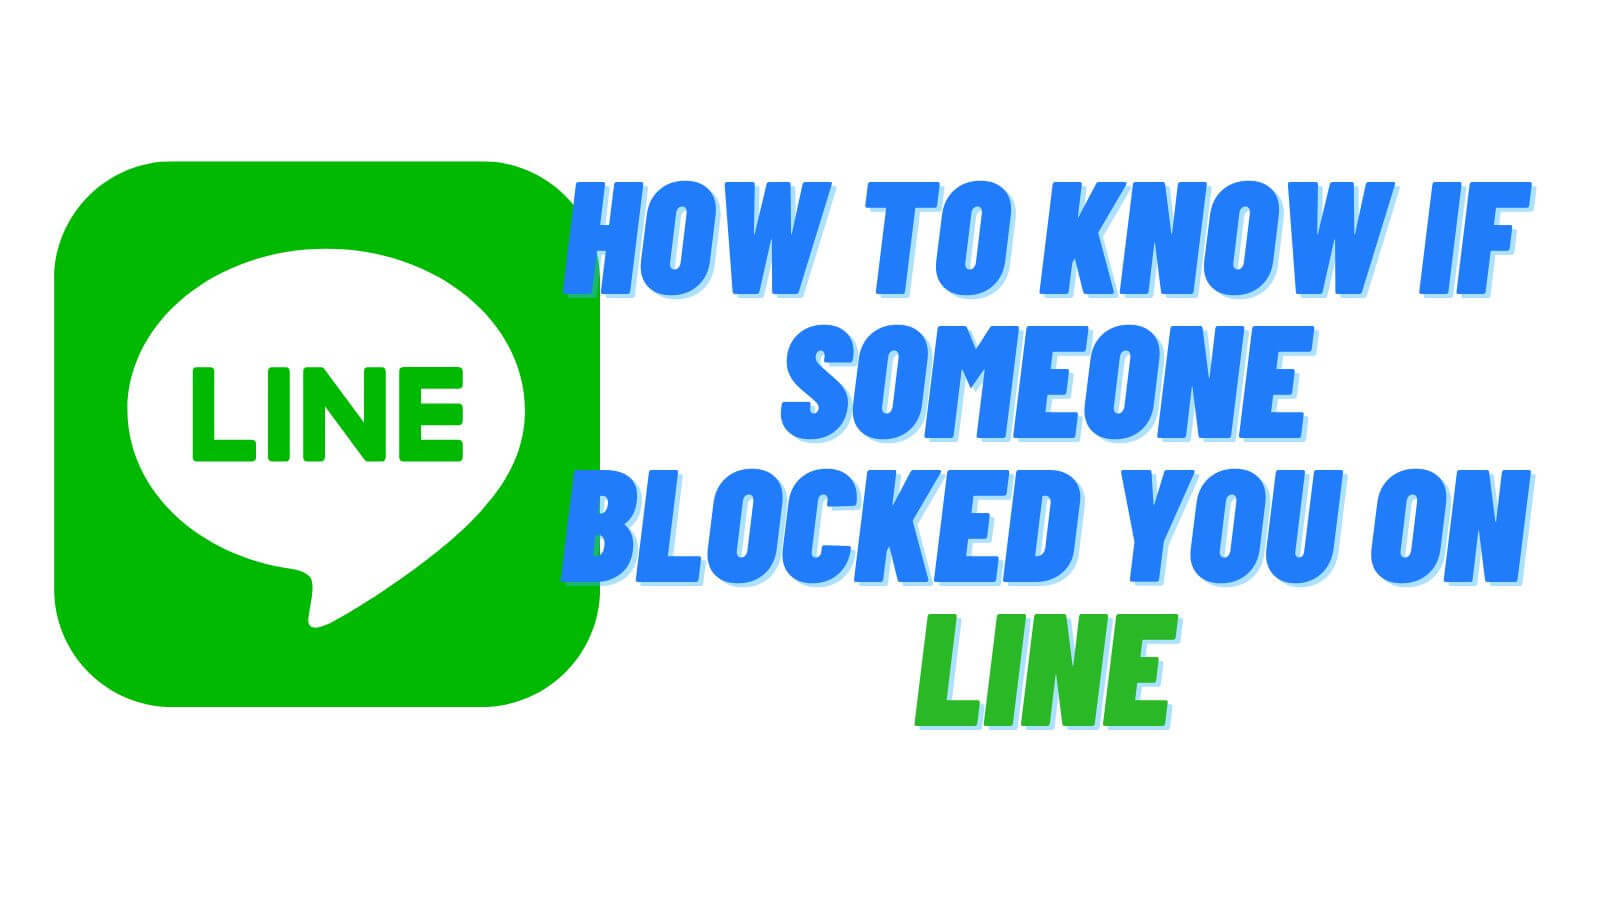 -How to Tell If Someone Blocked You on LINE